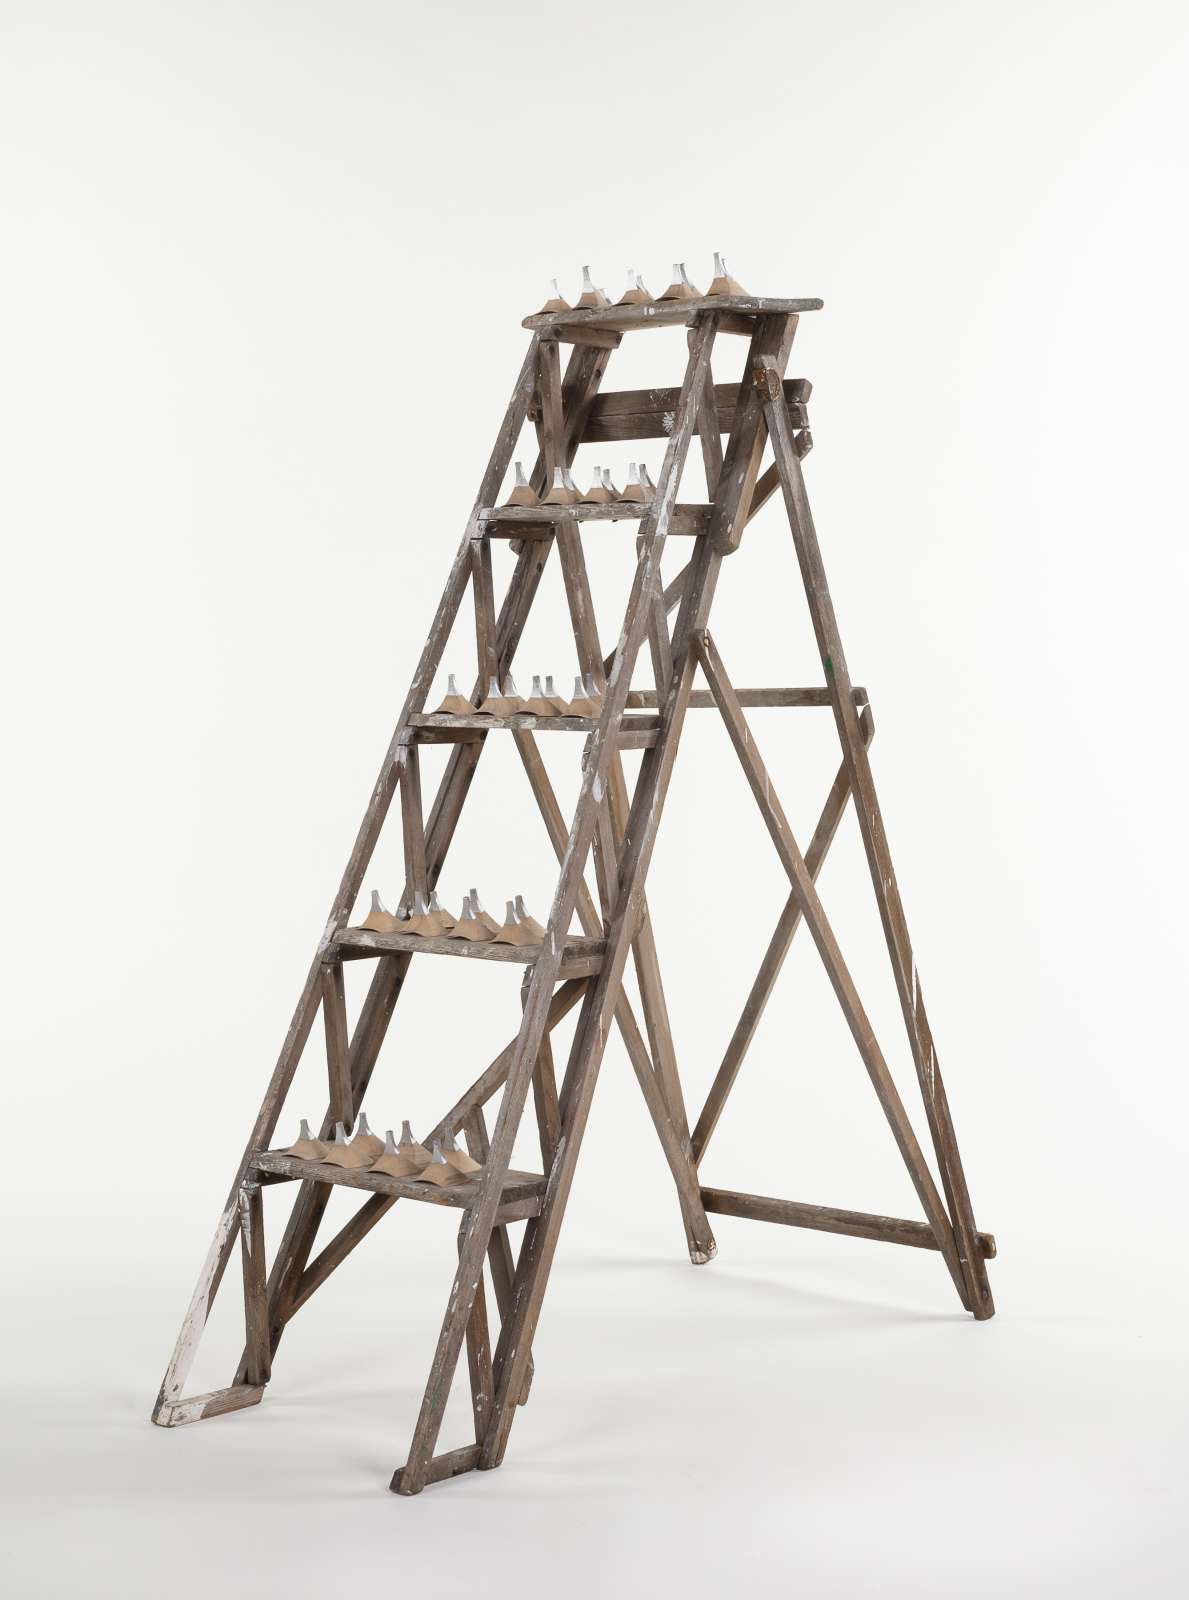 Lonnie Holley, Her Steps to Success, 2020, Wooden ladder and wooden and metal shoe making heels, 137 x 51.5 x 105.5 cm